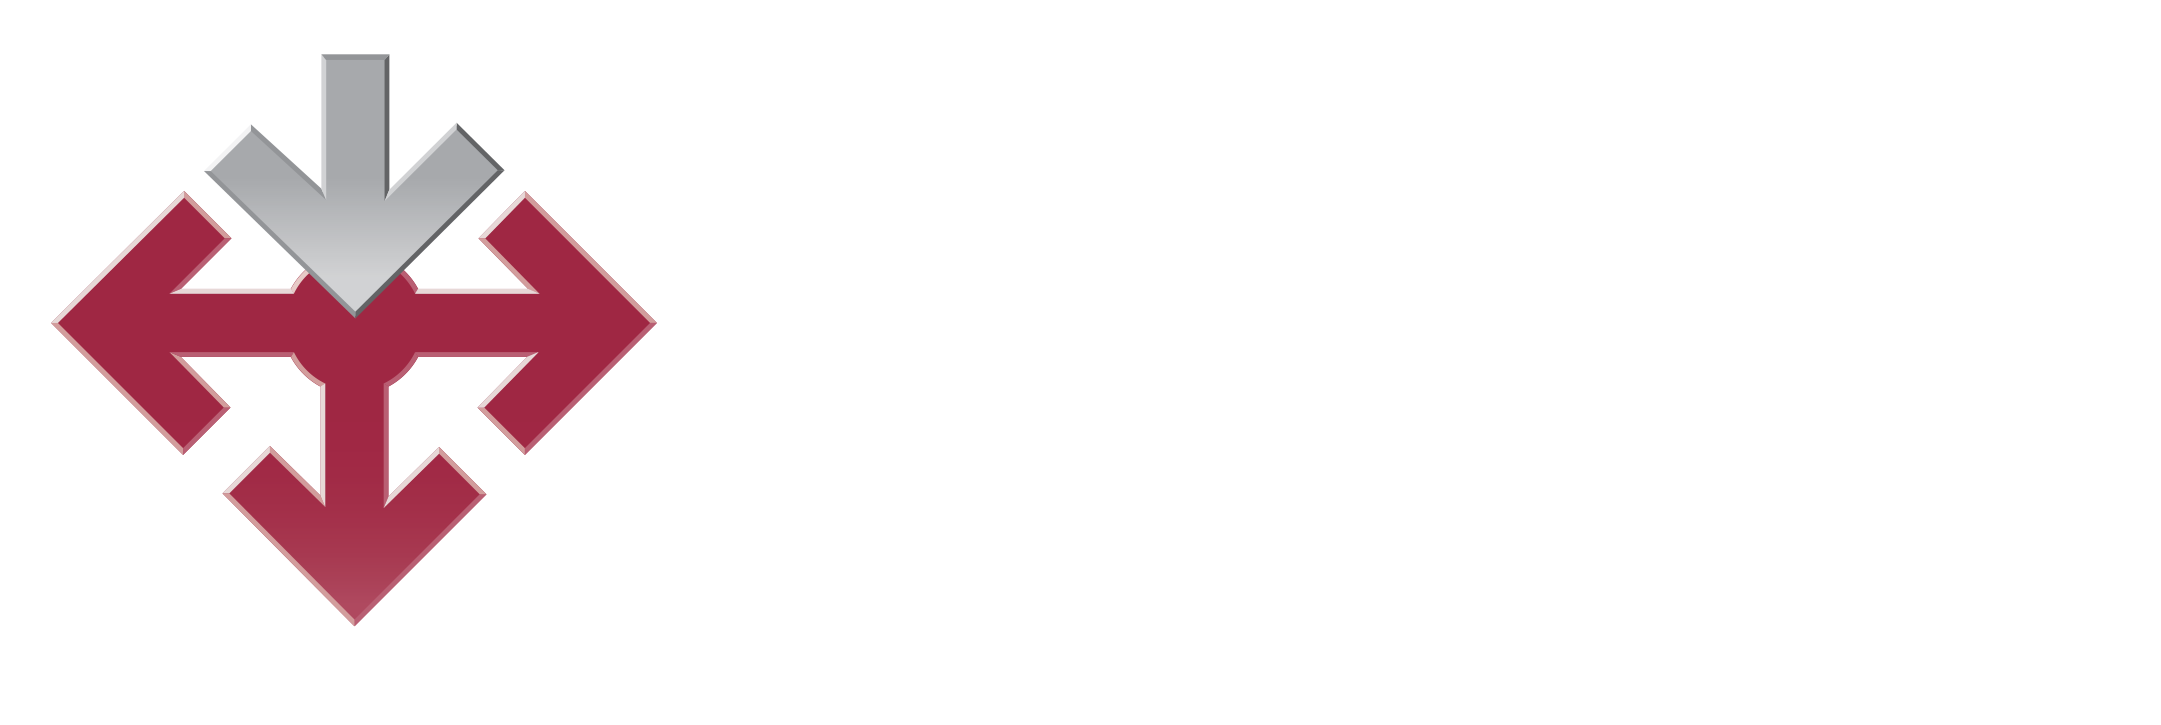 Introduction to the Nervous System - Sherman College of Chiropractic